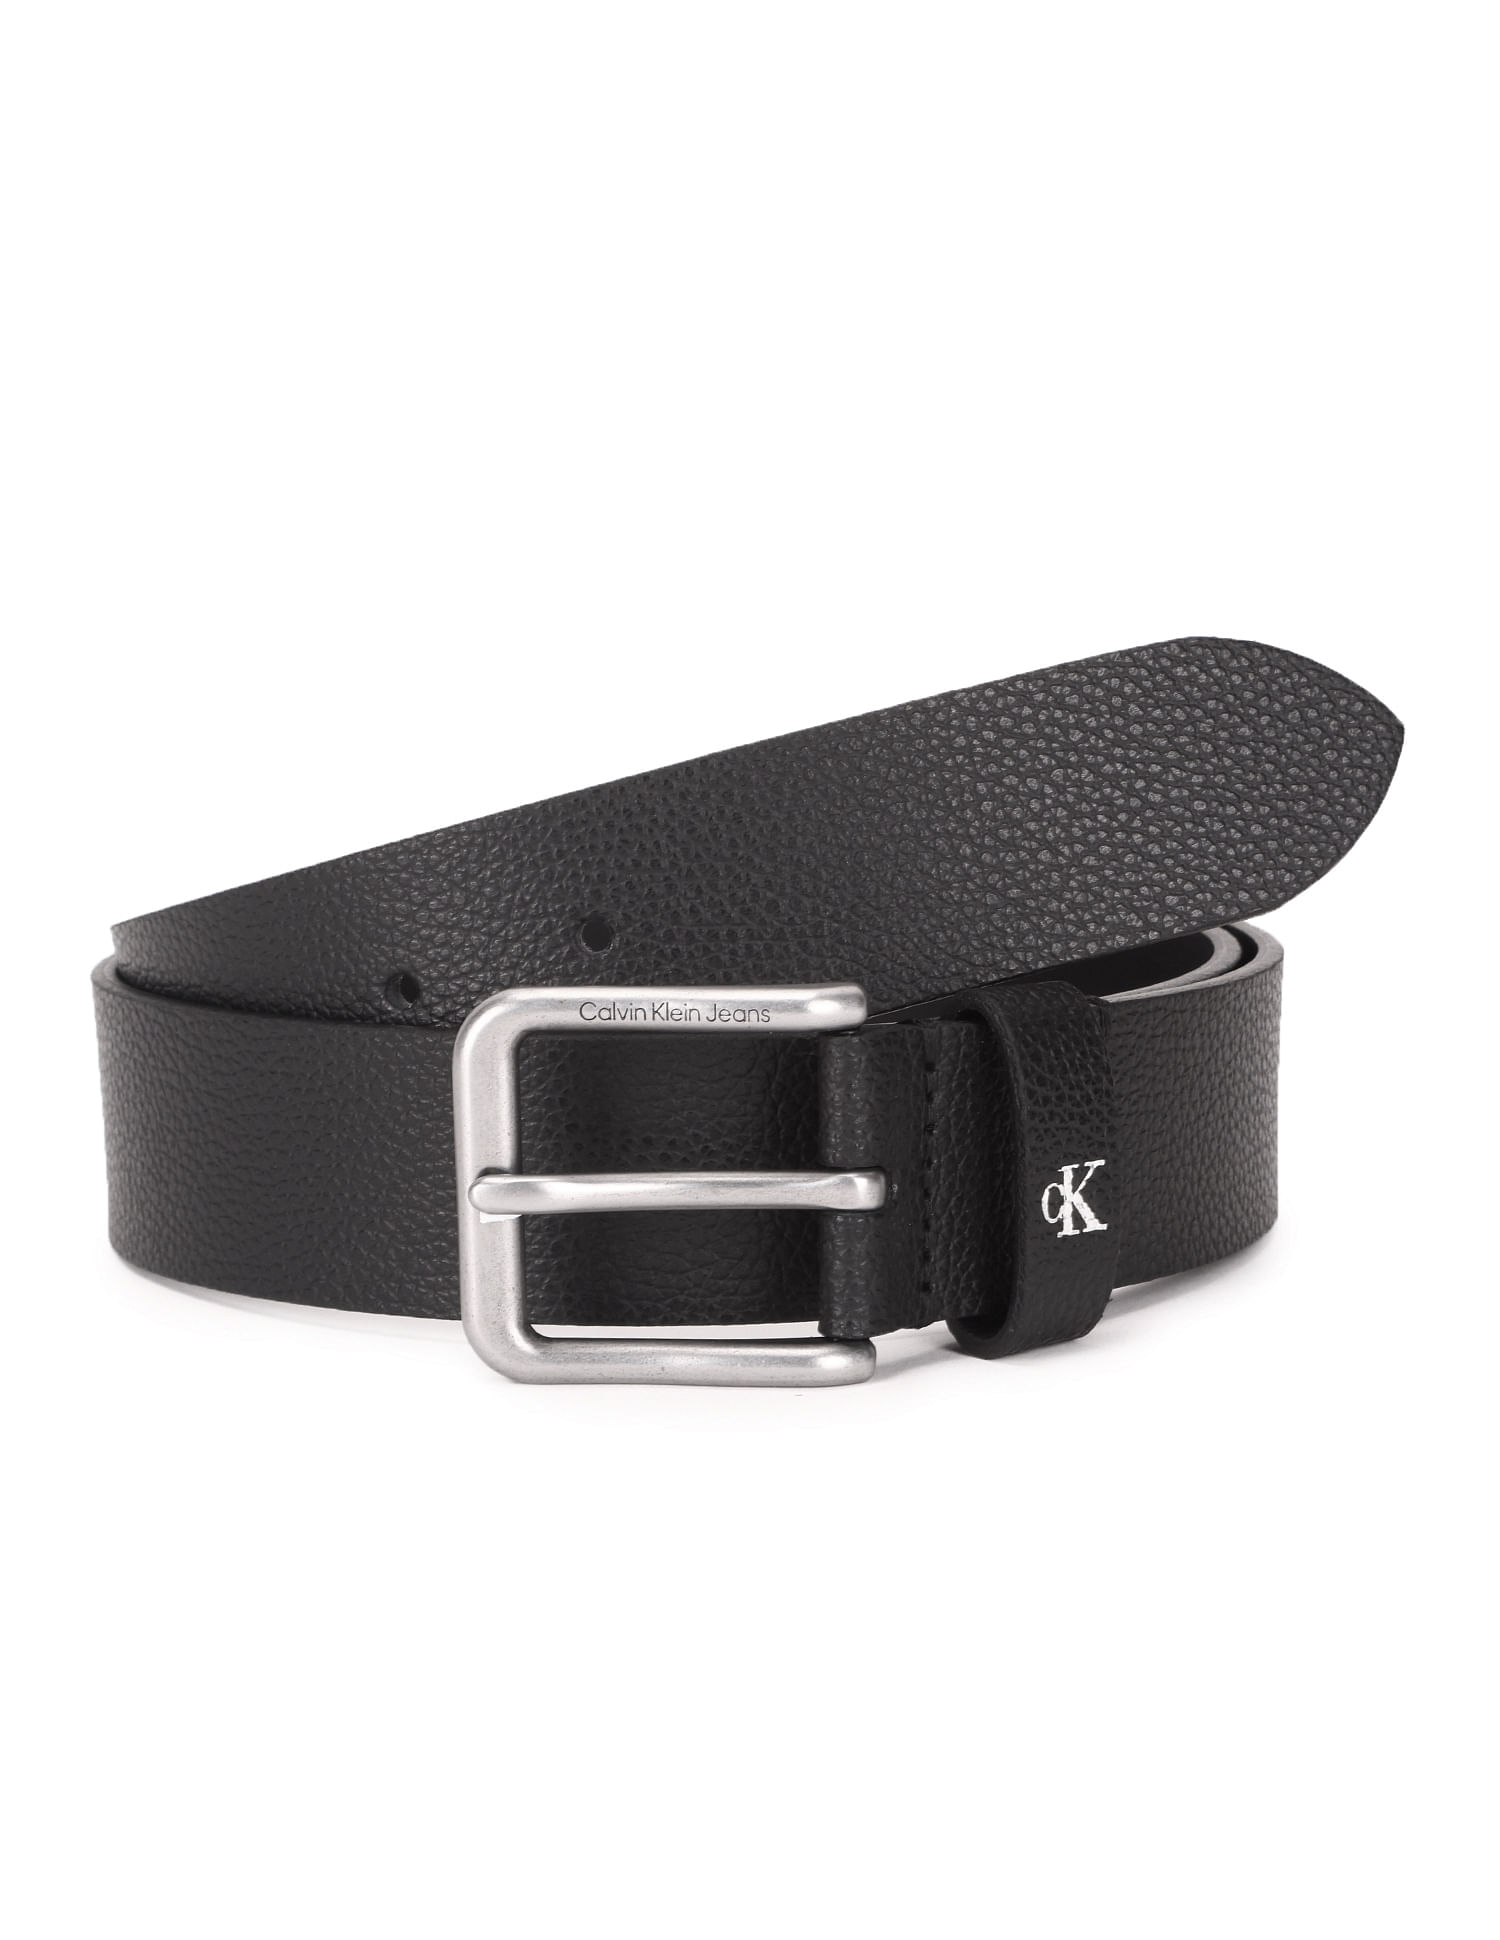 Buy Calvin Klein Jeans Round Belt Classic Leather